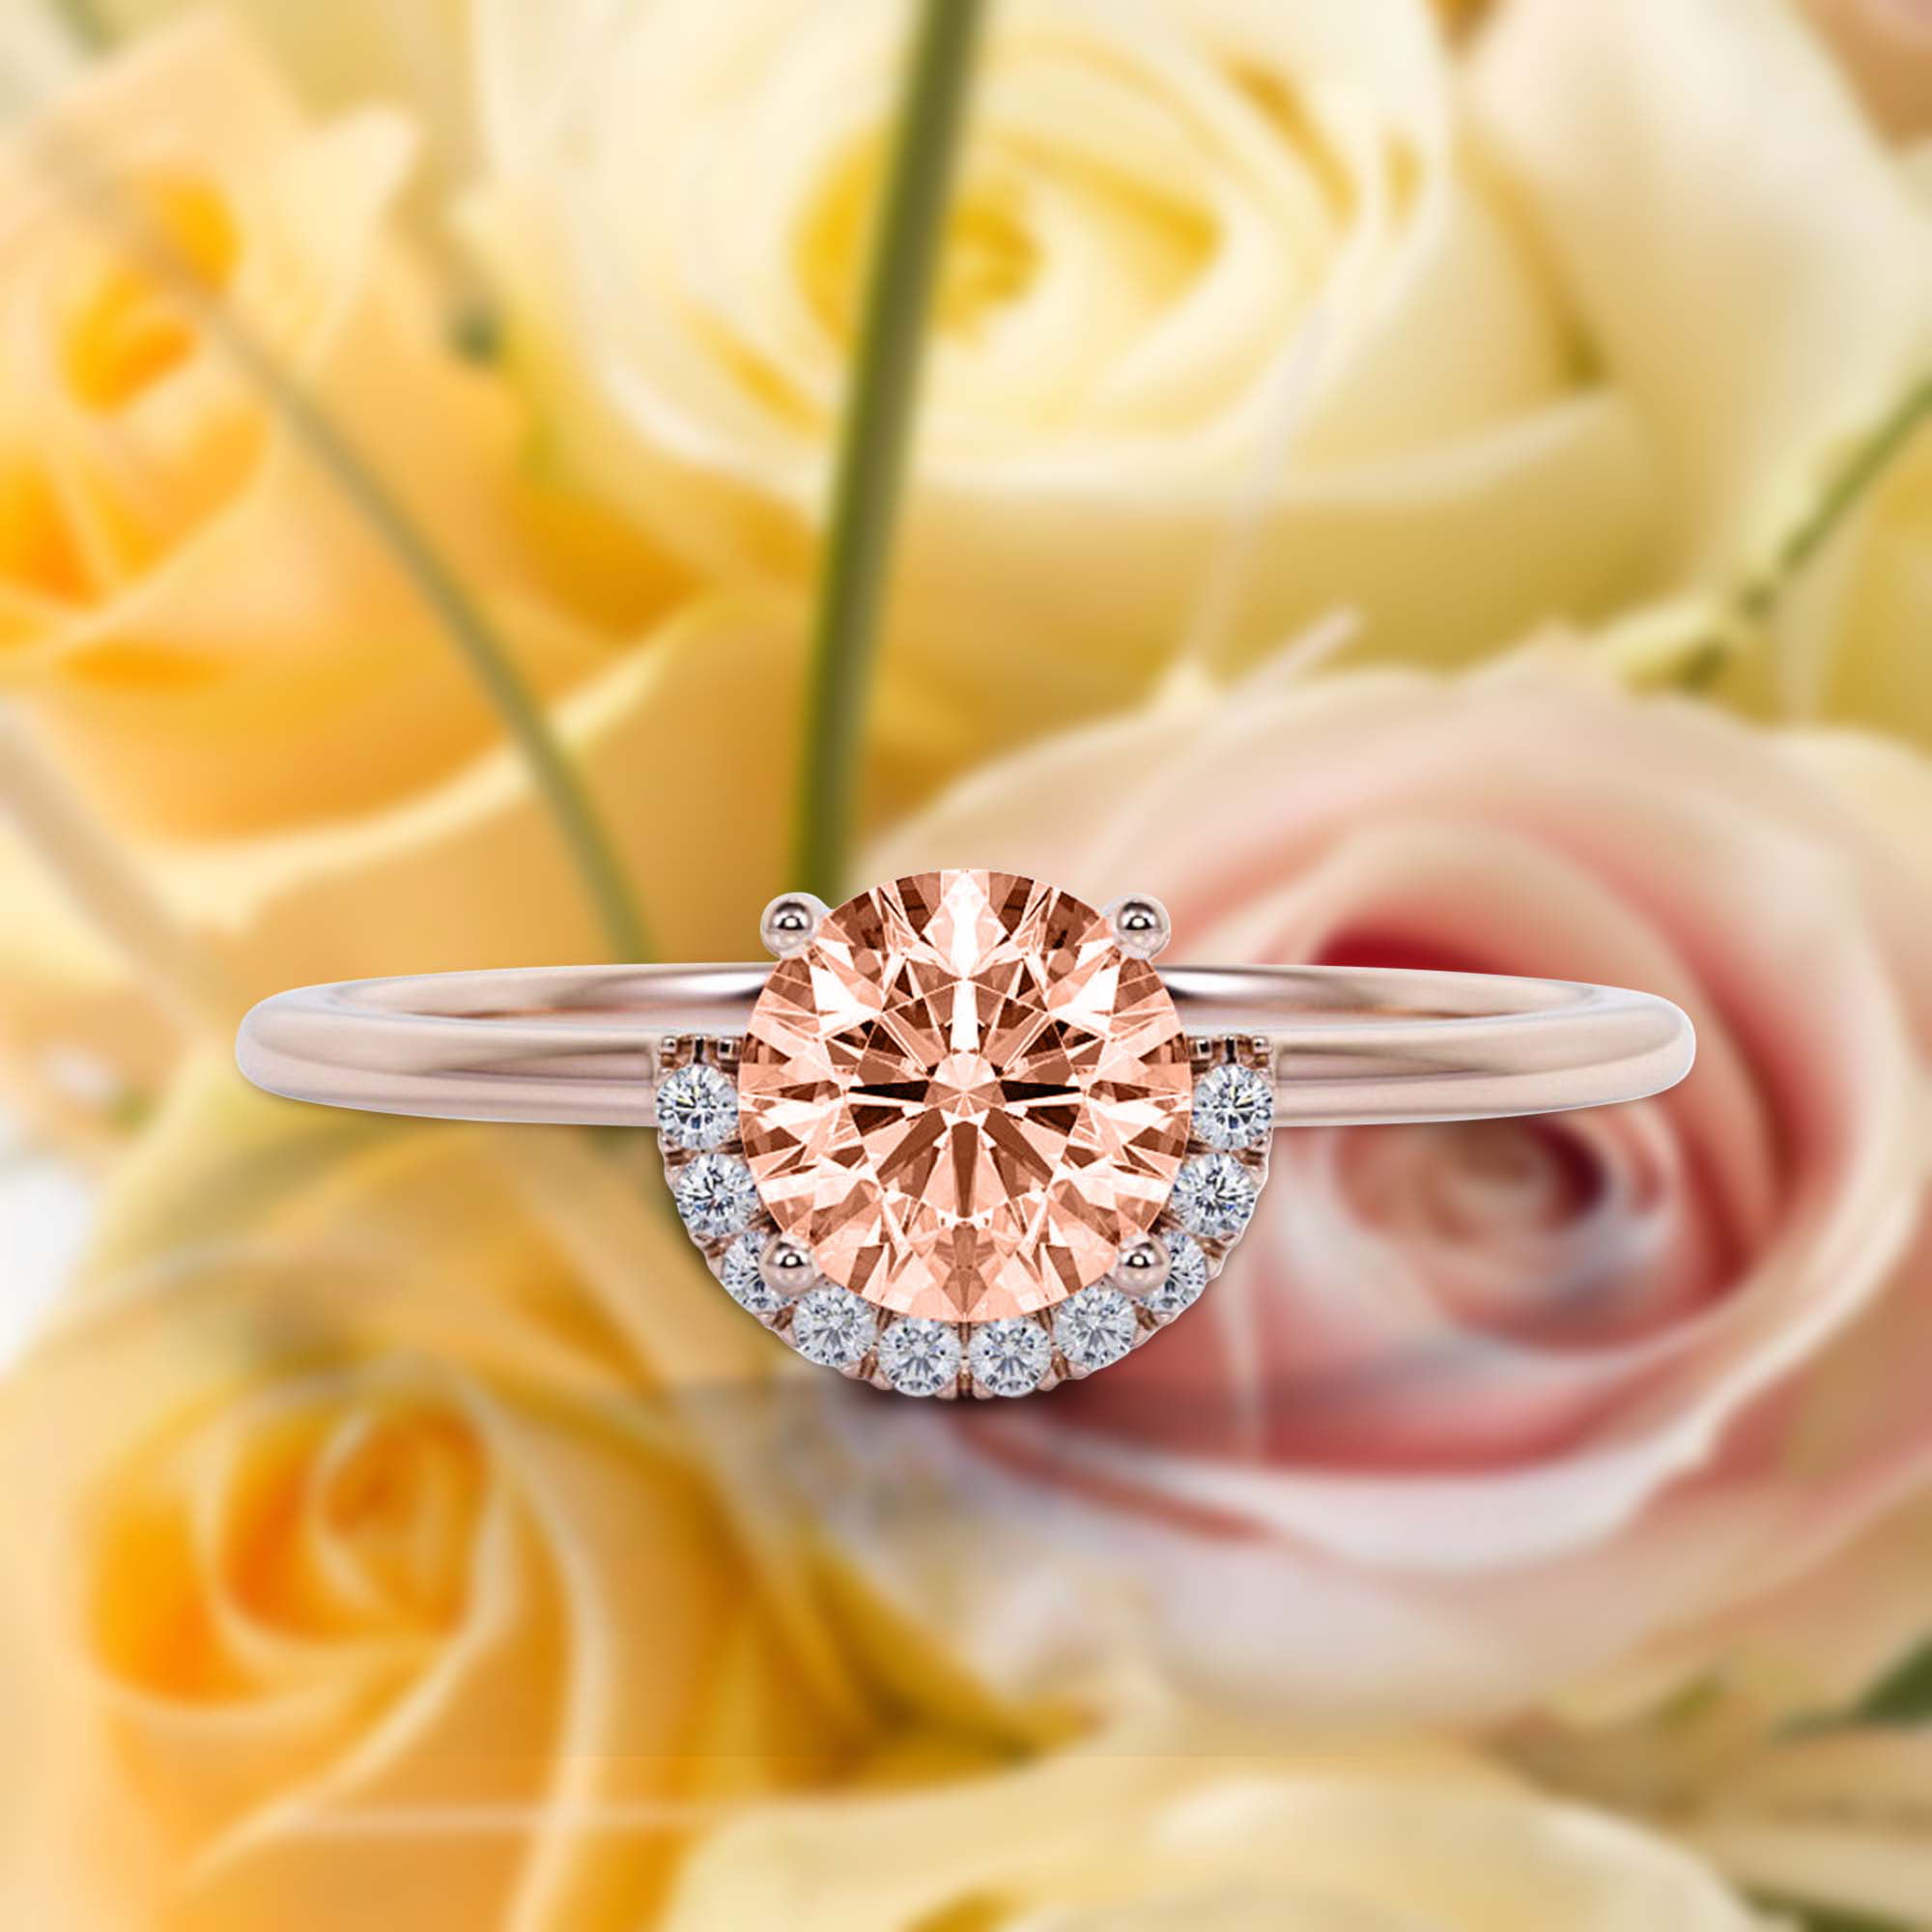 Why Diamonds Are Still The Number One Choice For Engagement Rings